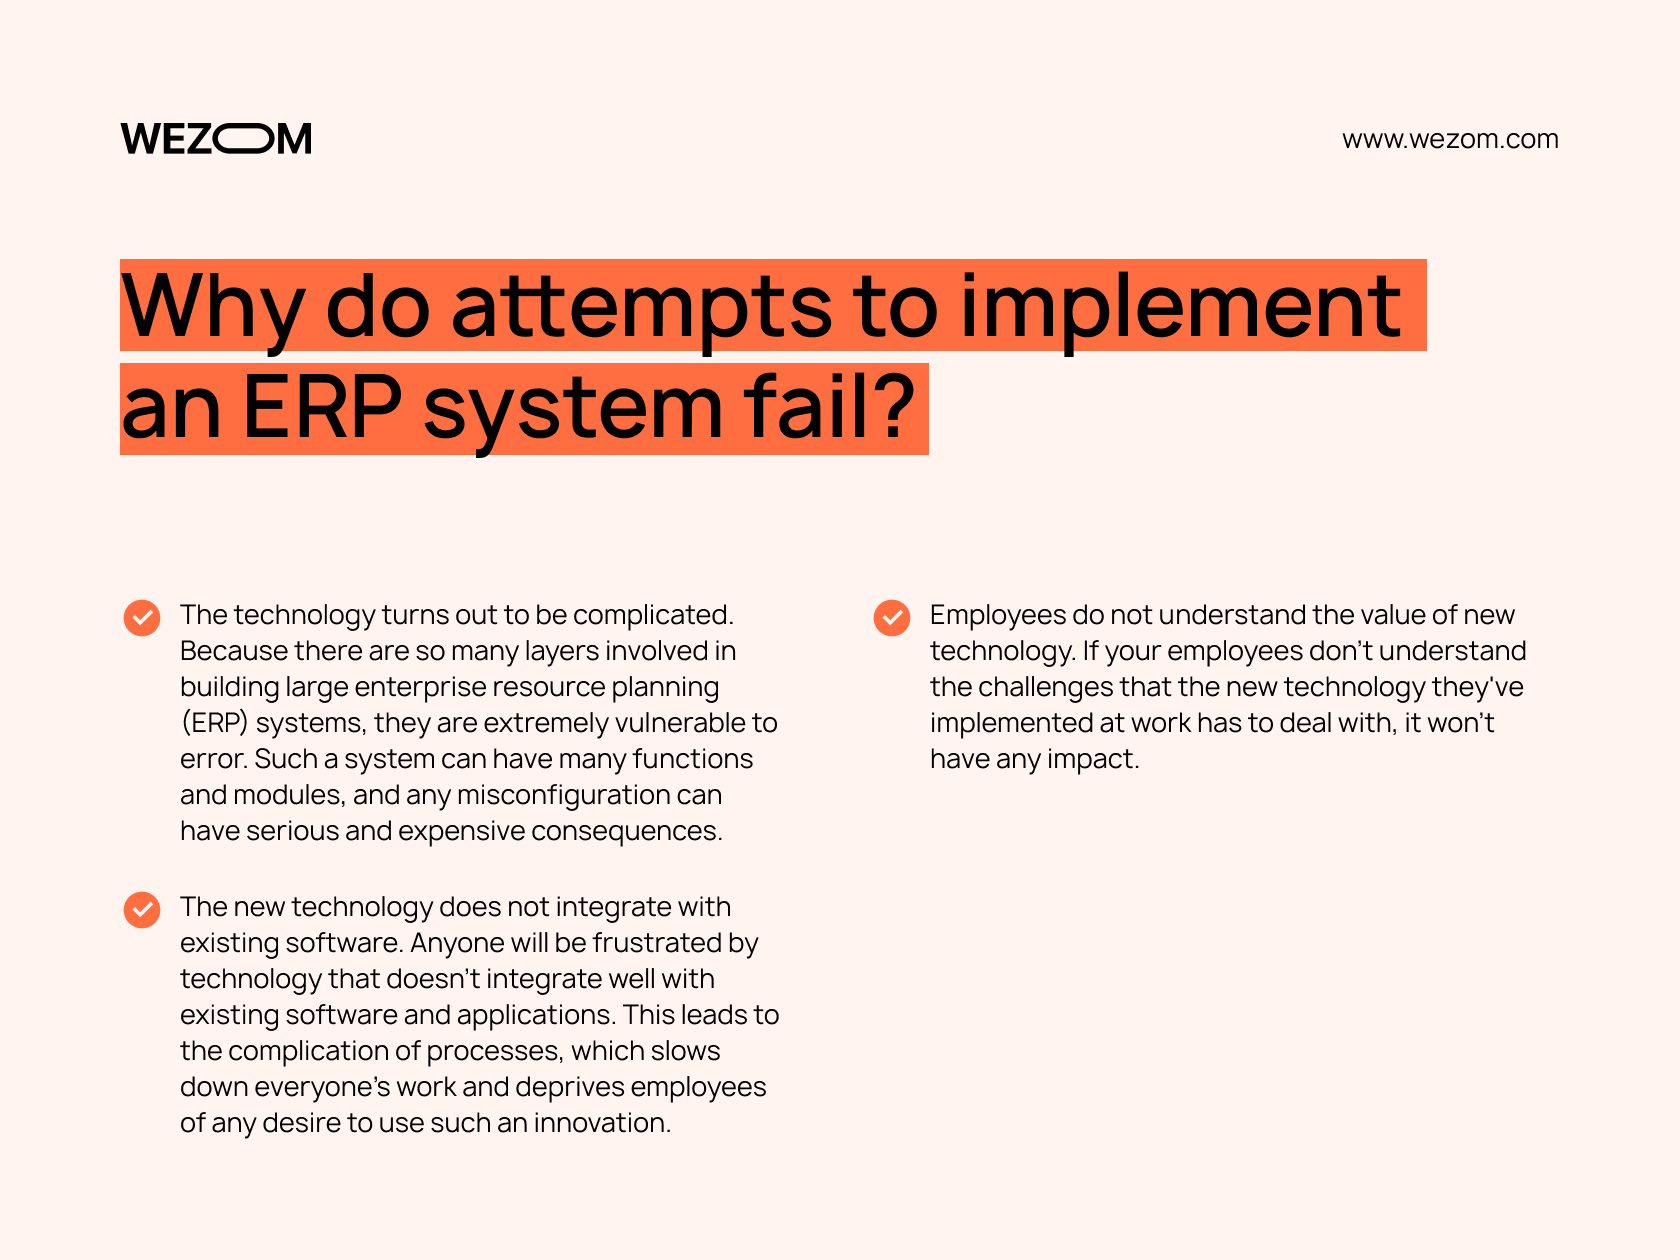 Why do attempts to implement an ERP system fail?